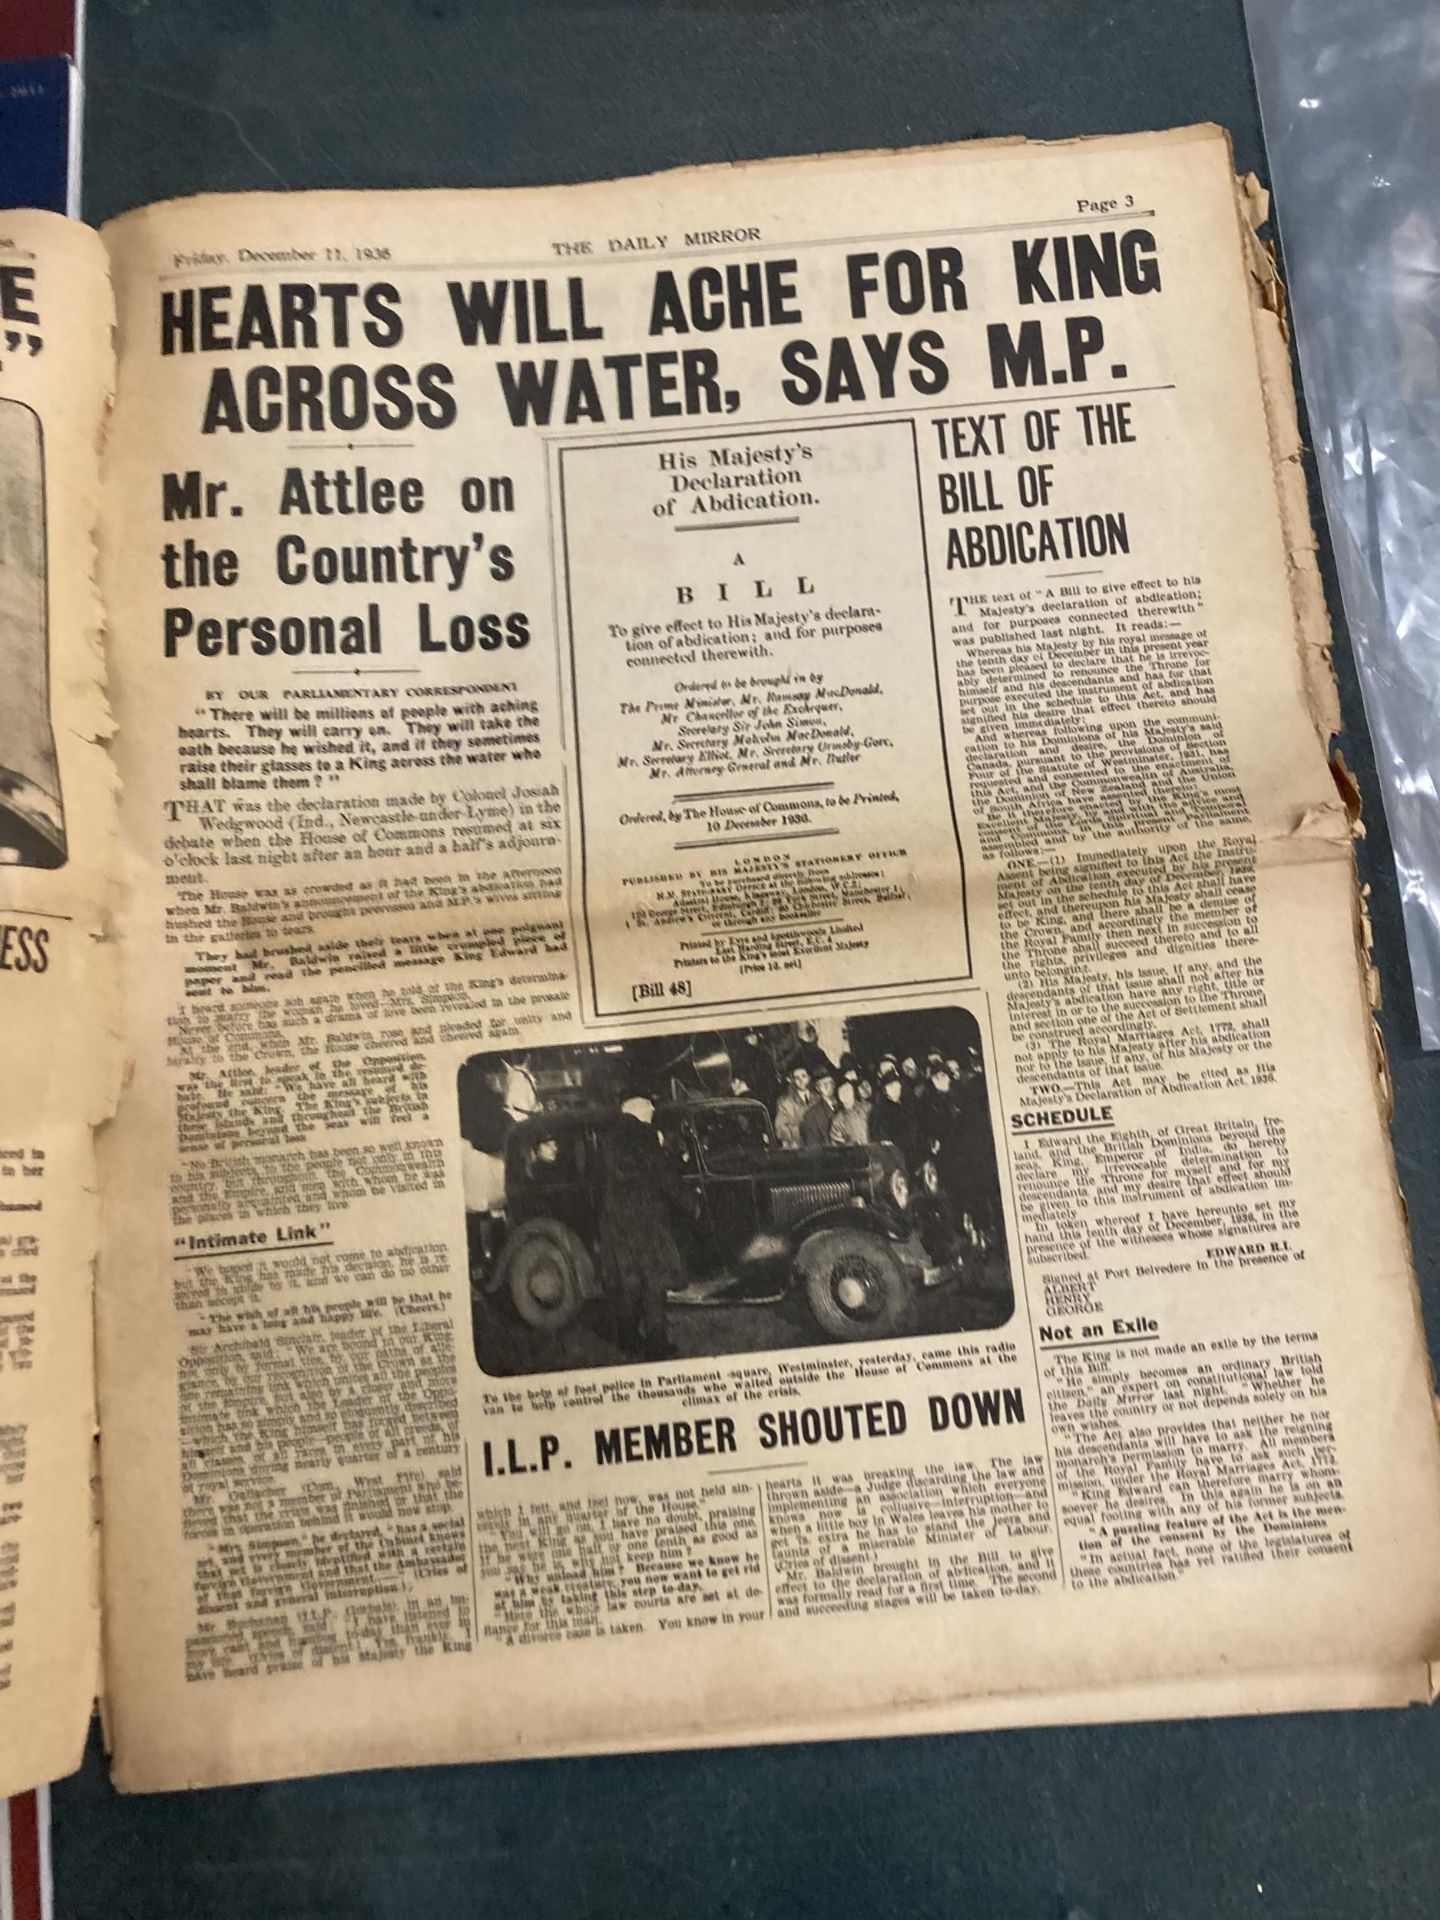 A GENUINE DAILY MIRROR 1936 KING'S ABDICATION ISSUE - Image 2 of 2